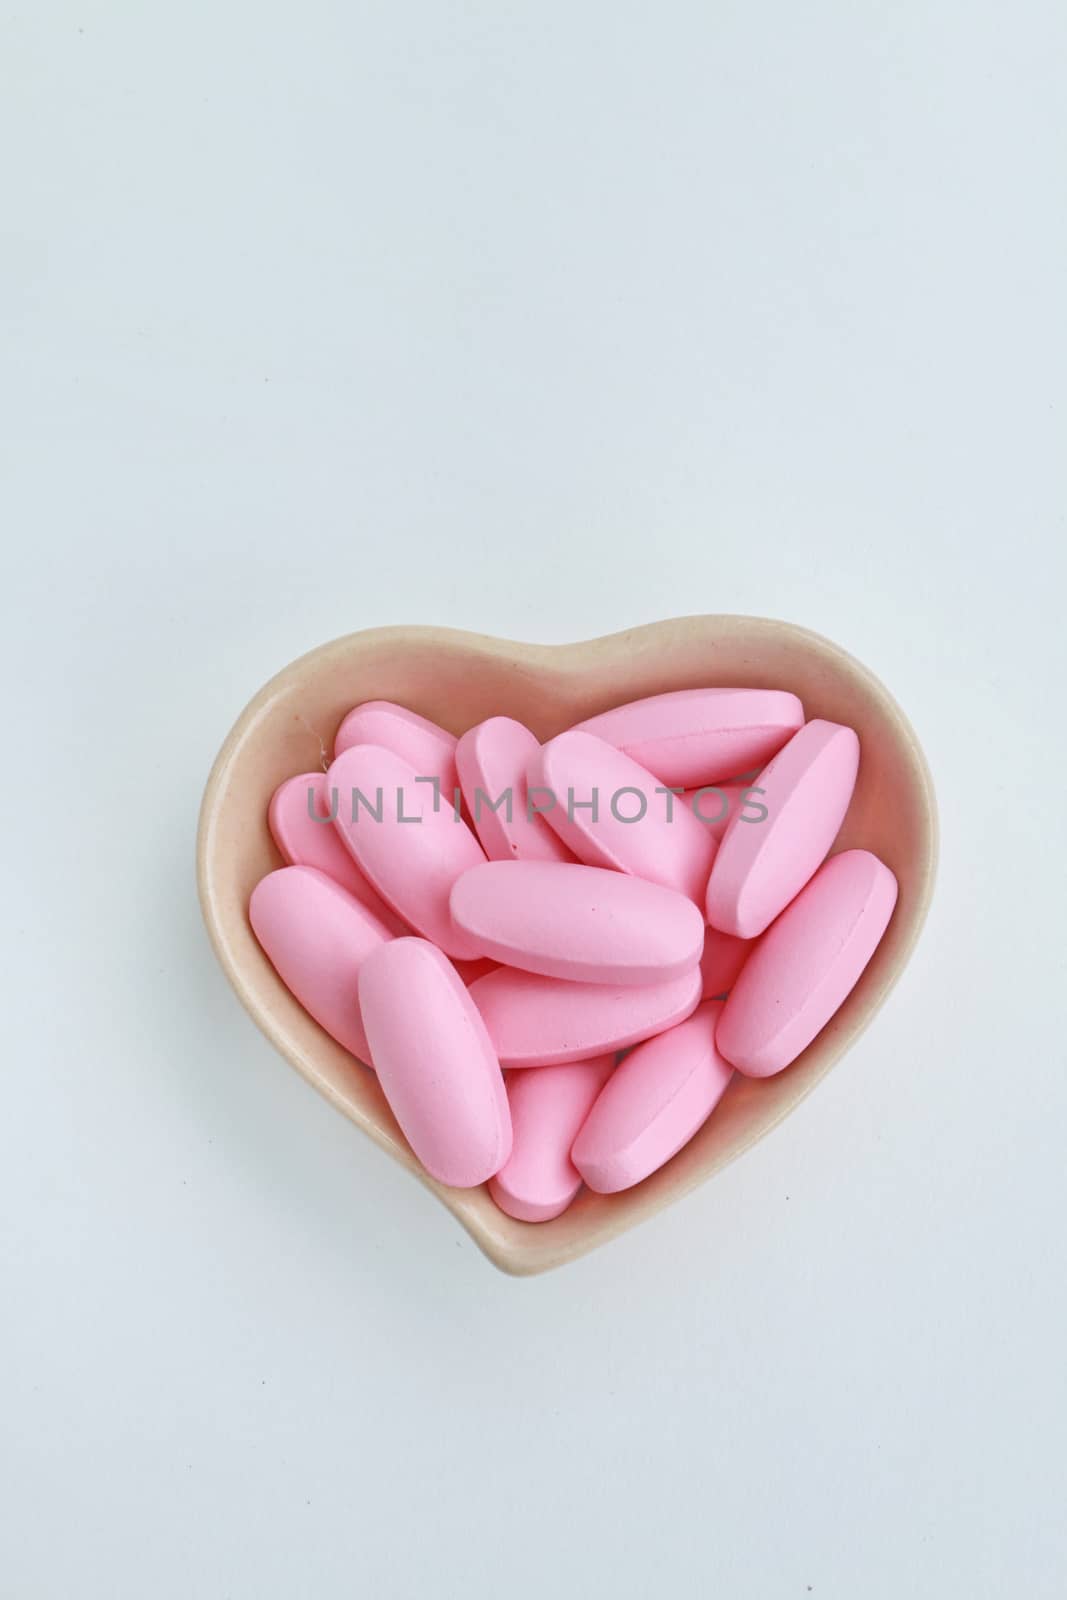 pink oval pills in the cup shape of heart2 by kaidevil